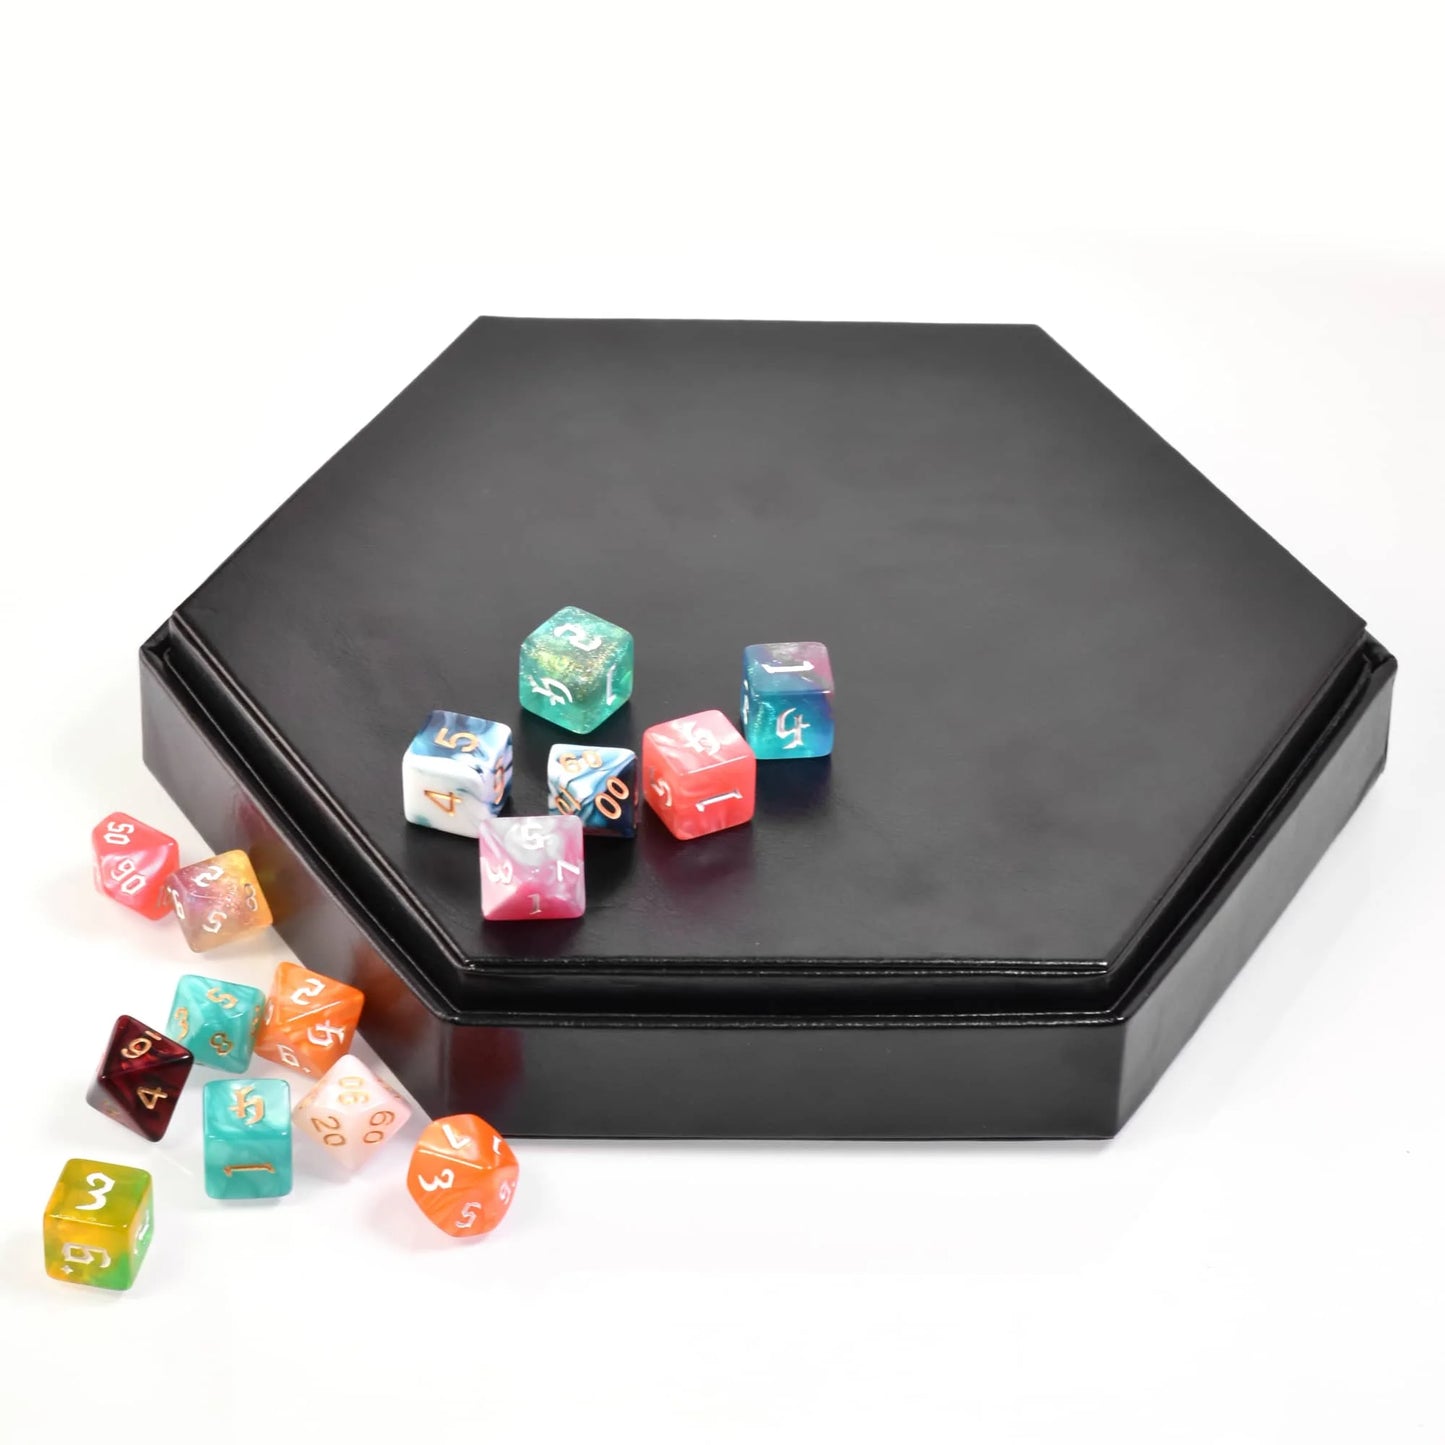 2 in 1 D&D Dice Tray & Dice Box Dice Case Hexagon Dice Rolling Tray Dice Holder PU Leather for Dice Games RPG Table Games